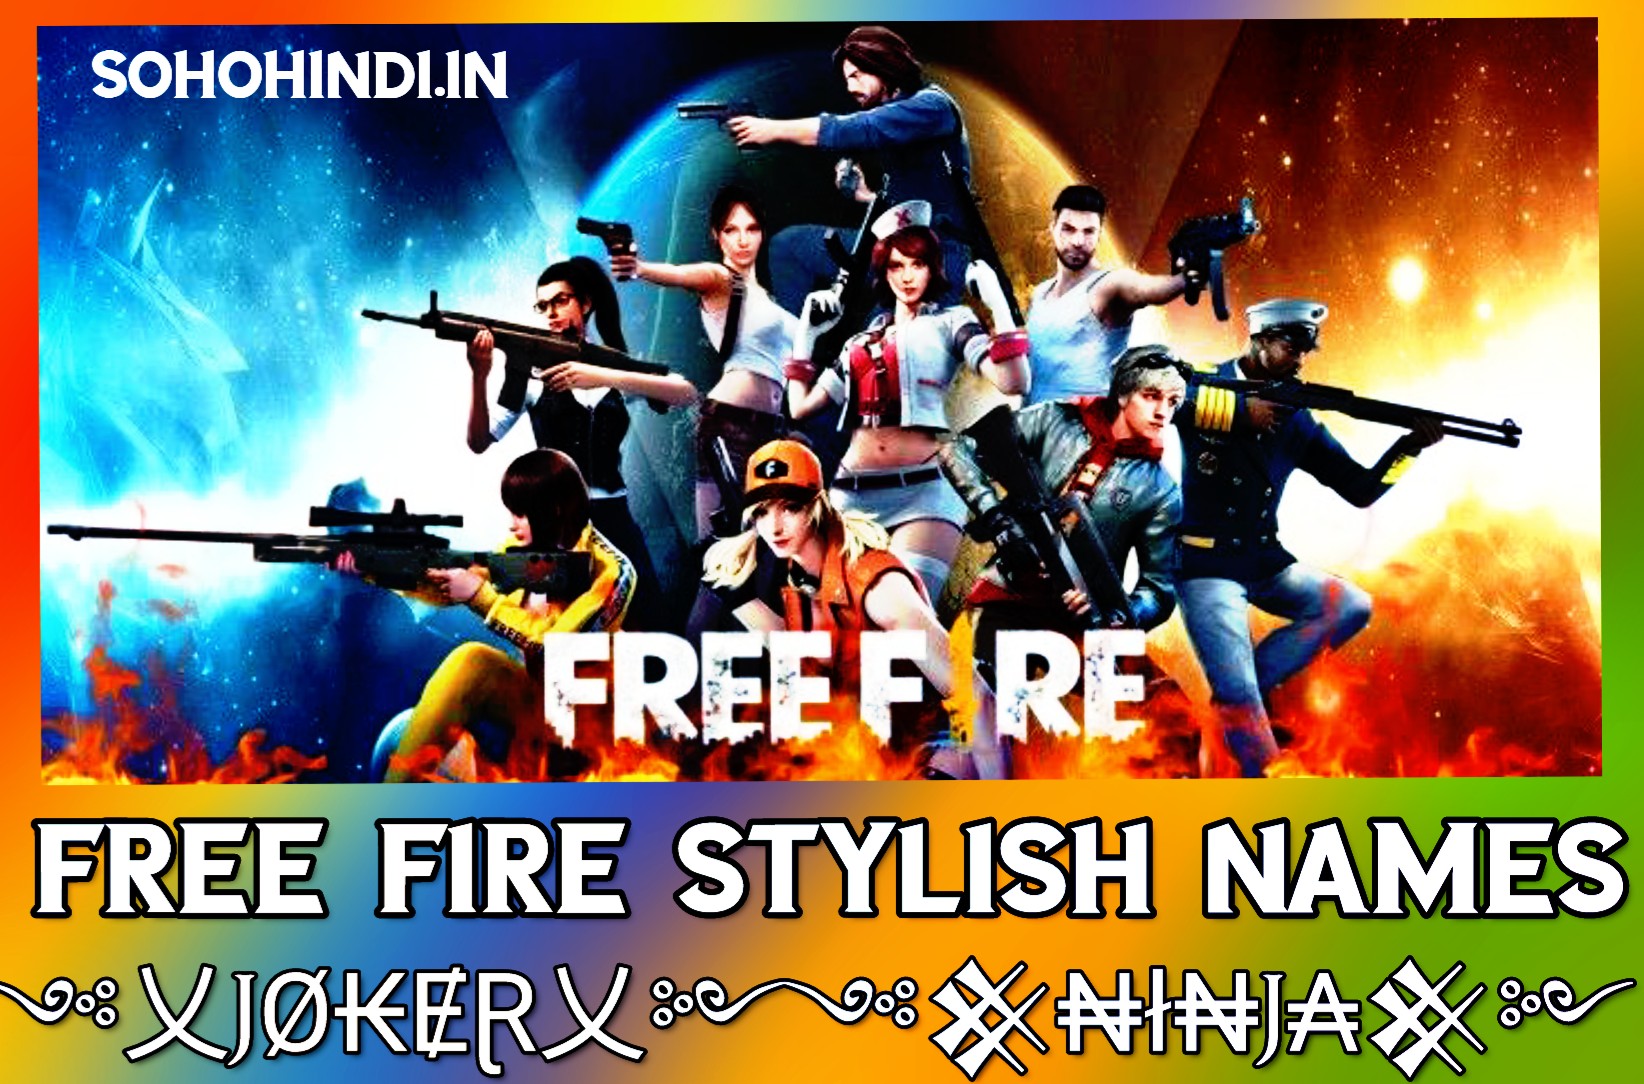 300 Best Free Fire Names 2021 Stylish Free Fire Names With Symbols